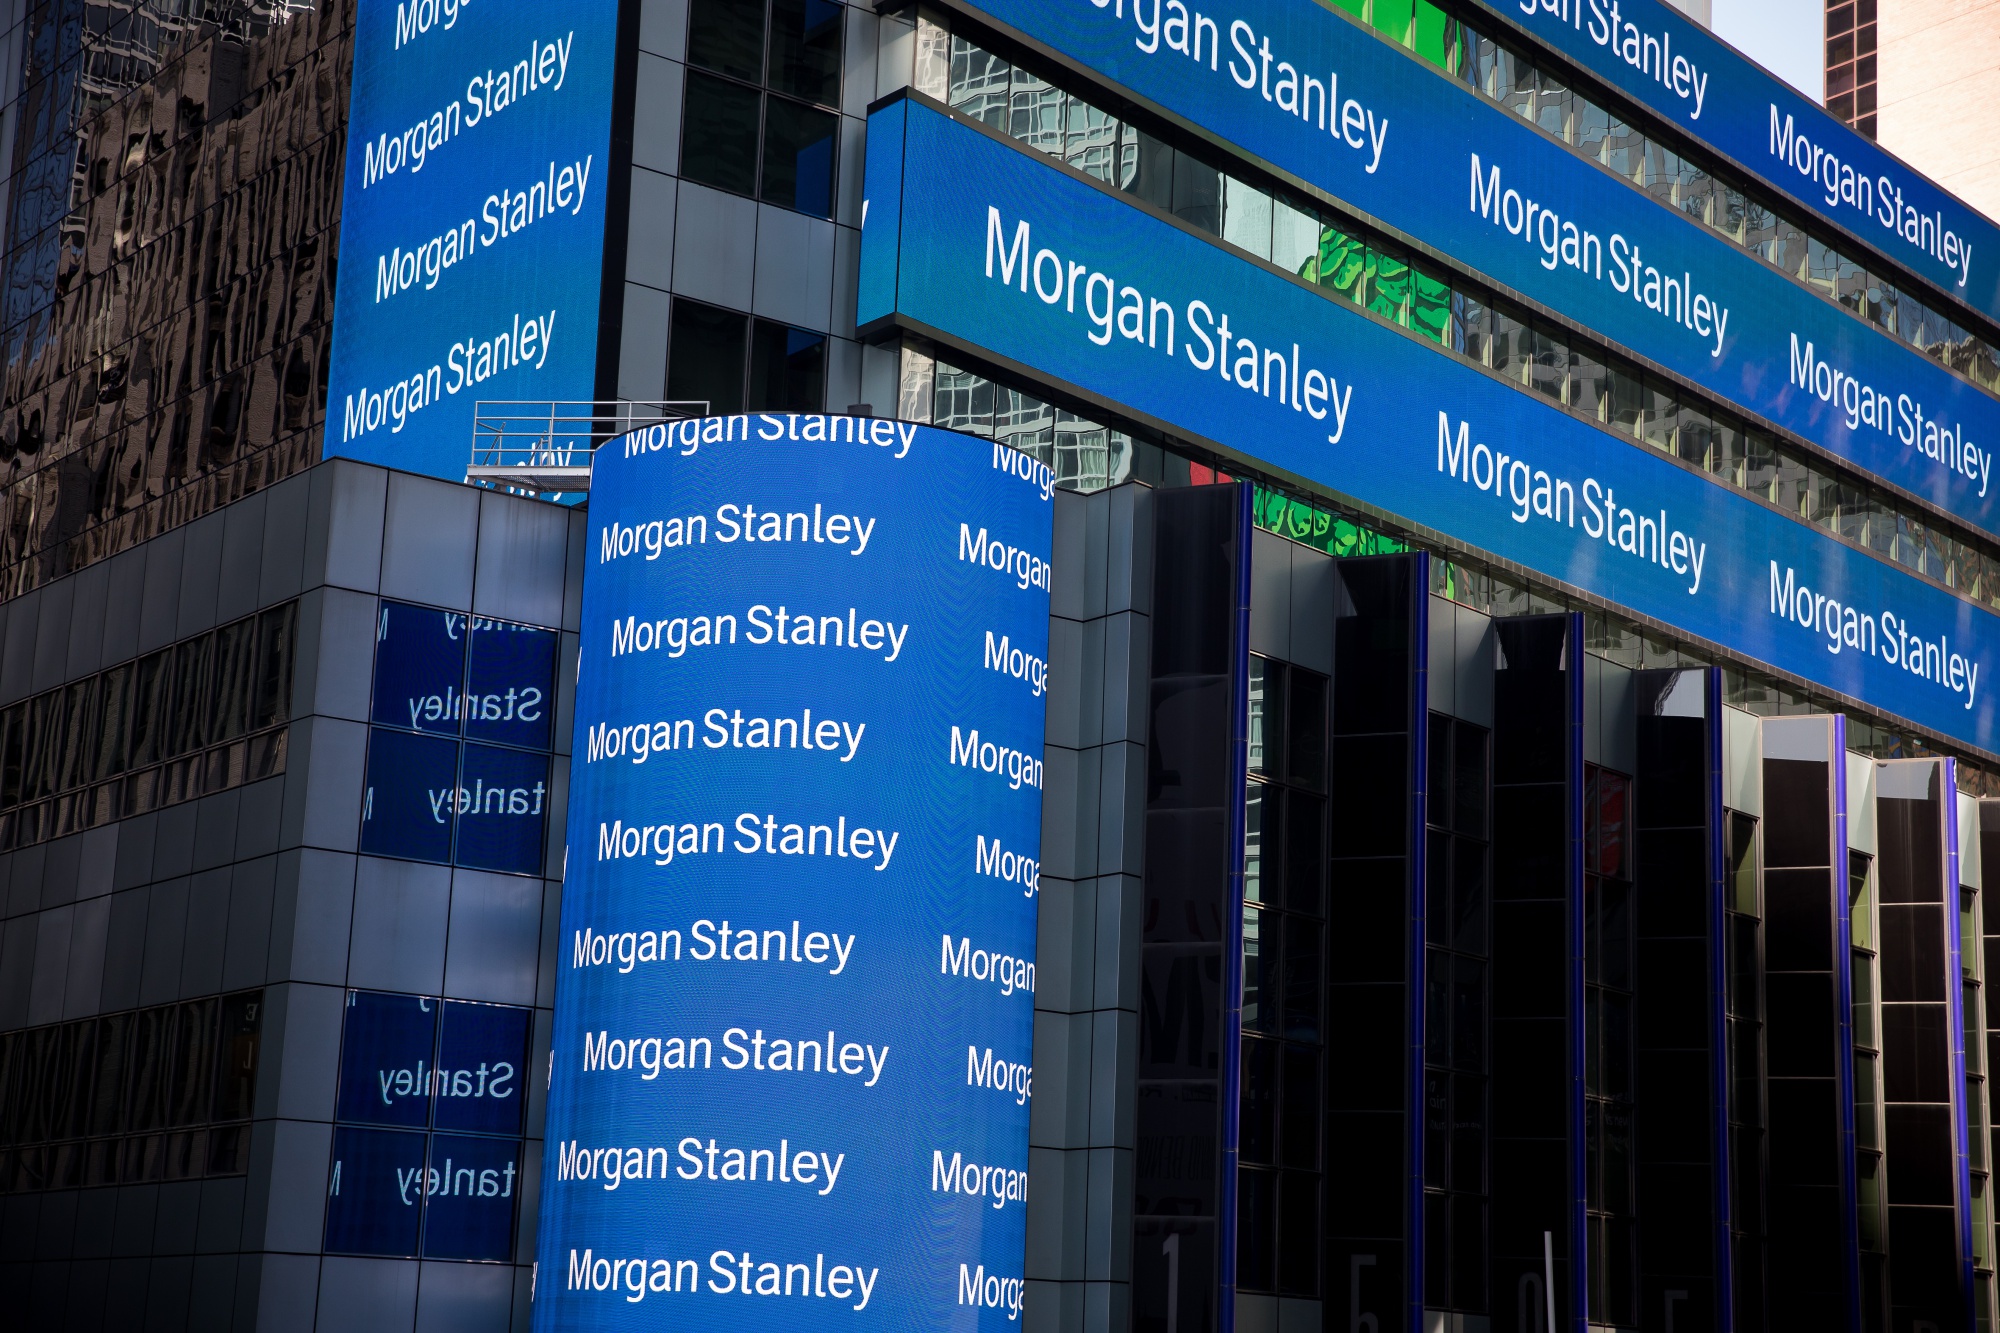 Monitors display signage outside of Morgan Stanley global headquarters.